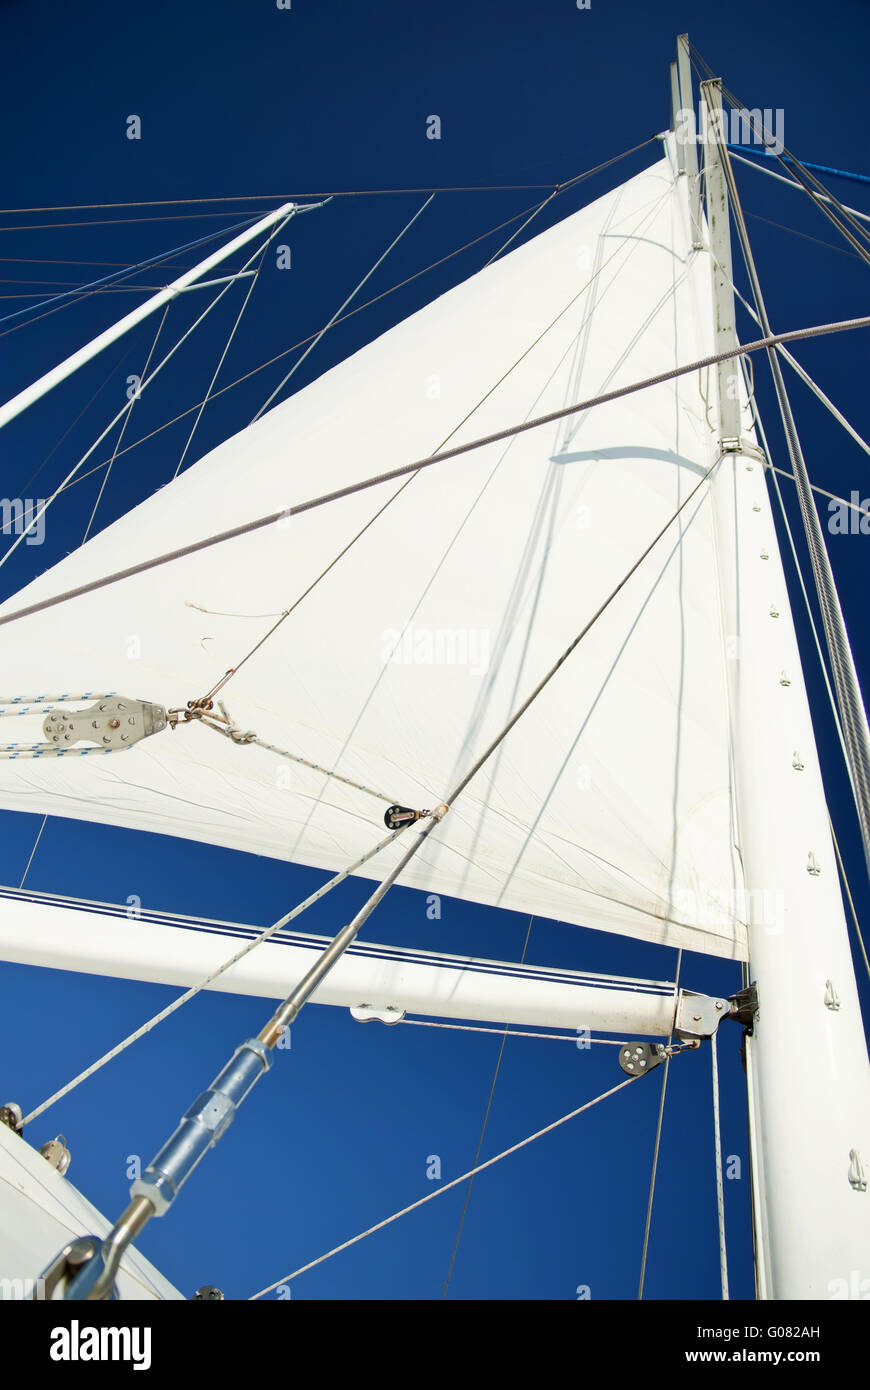 Sail of a catamaran at calm weather with blue sky Stock Photo